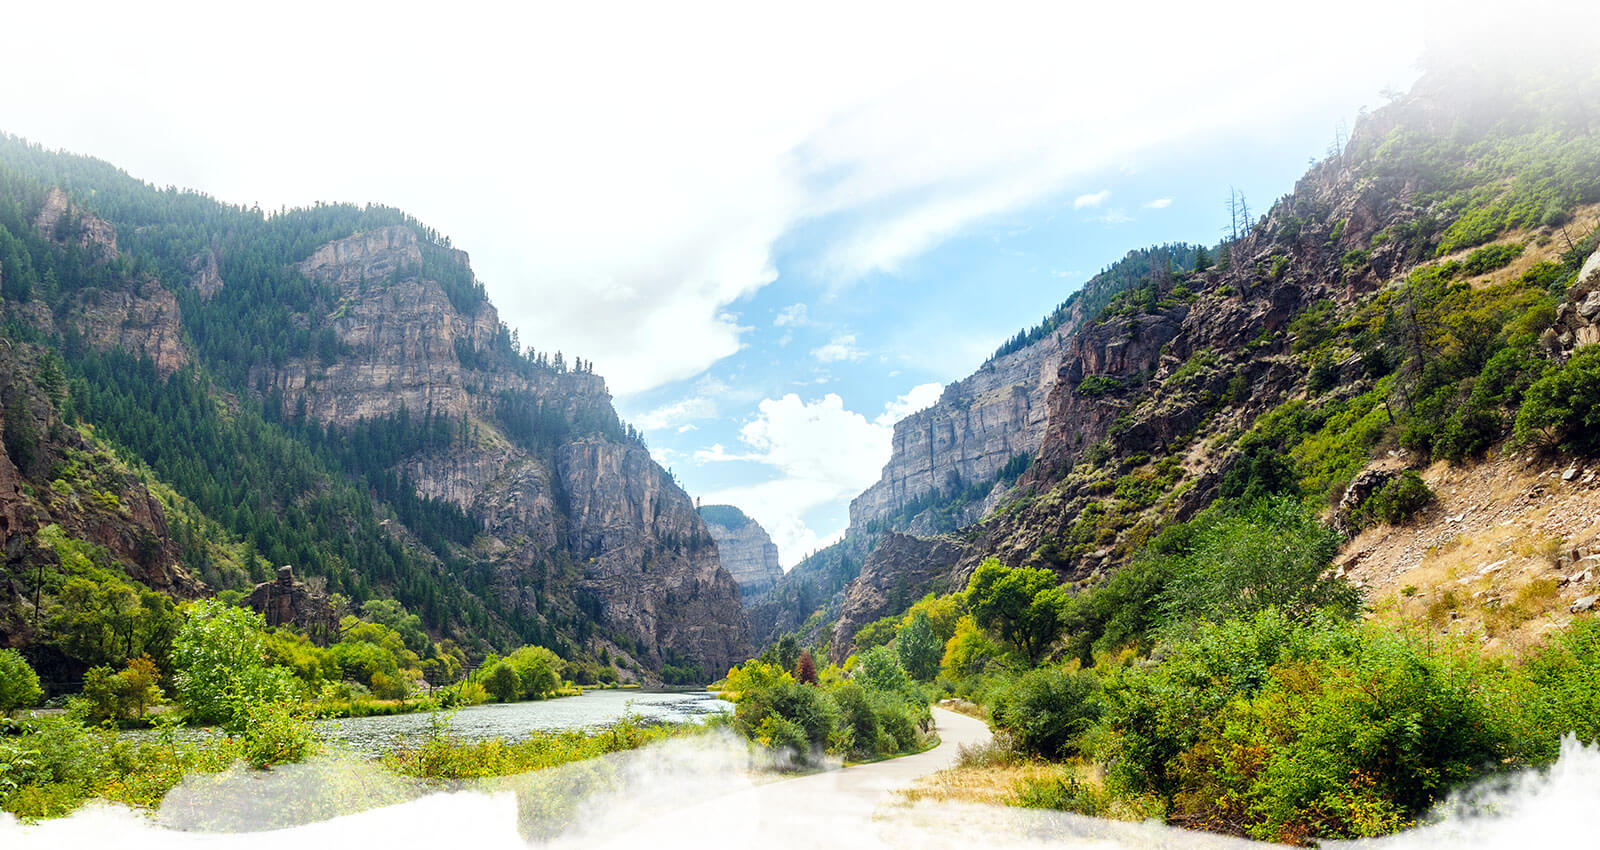 Image of the Colorado River and Glenwood Canyon Bike Trail near the Hanging Lake Trailhead in the Glenwood Canyon. The river, vegetation and canyon walls make a stunning view from the trail.